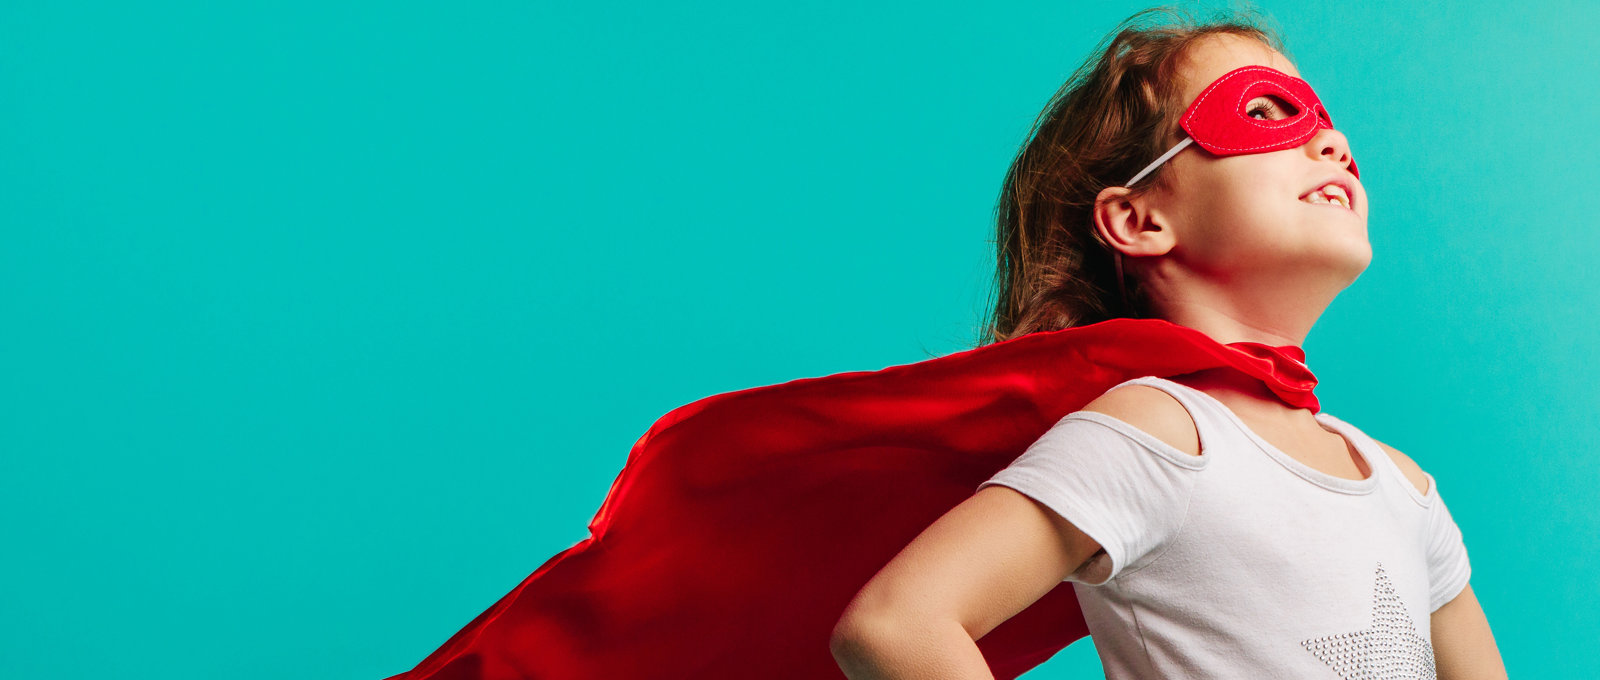 Photo of a young girl as a superhero - wearing a cape and red eye mask